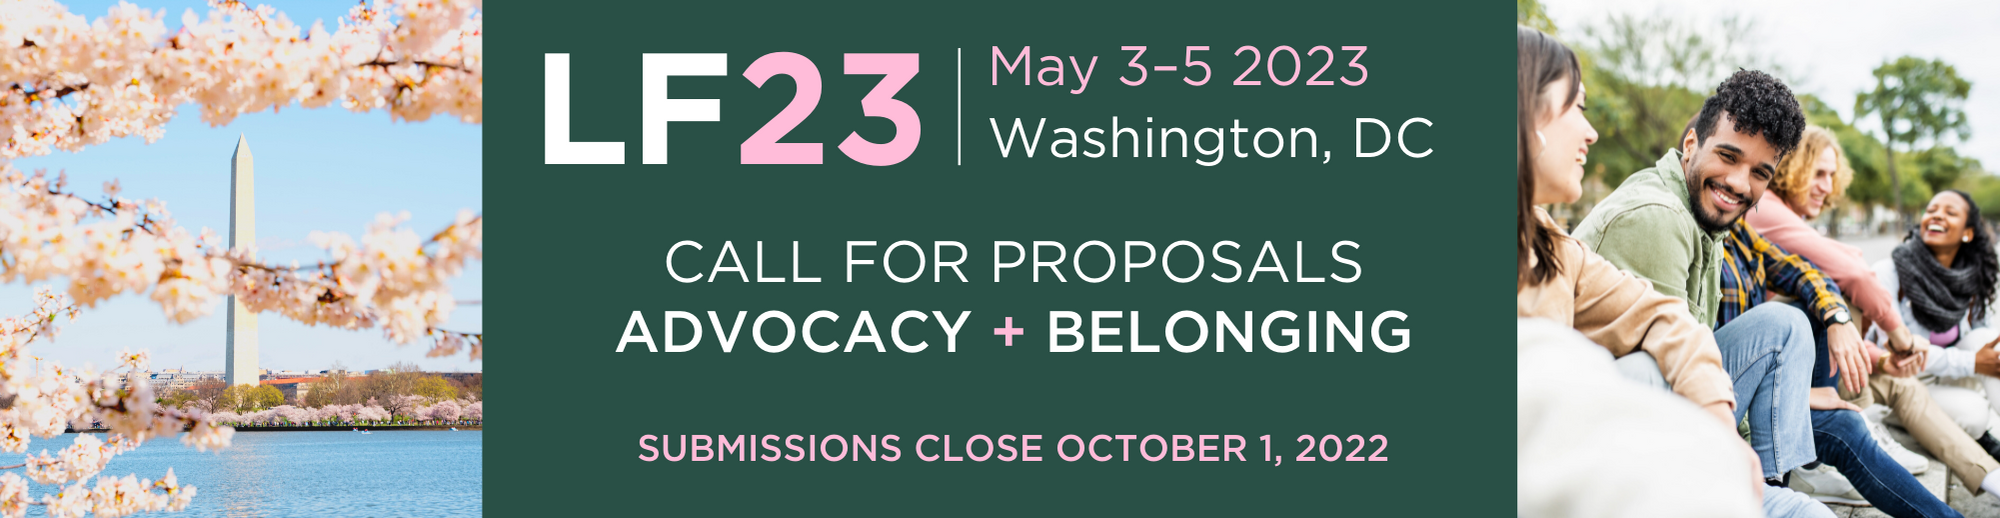 LF23
May 3-5 2023
Washington, DC

Call for Proposals
Advocacy + Belonging

Submissions close October 1, 2022